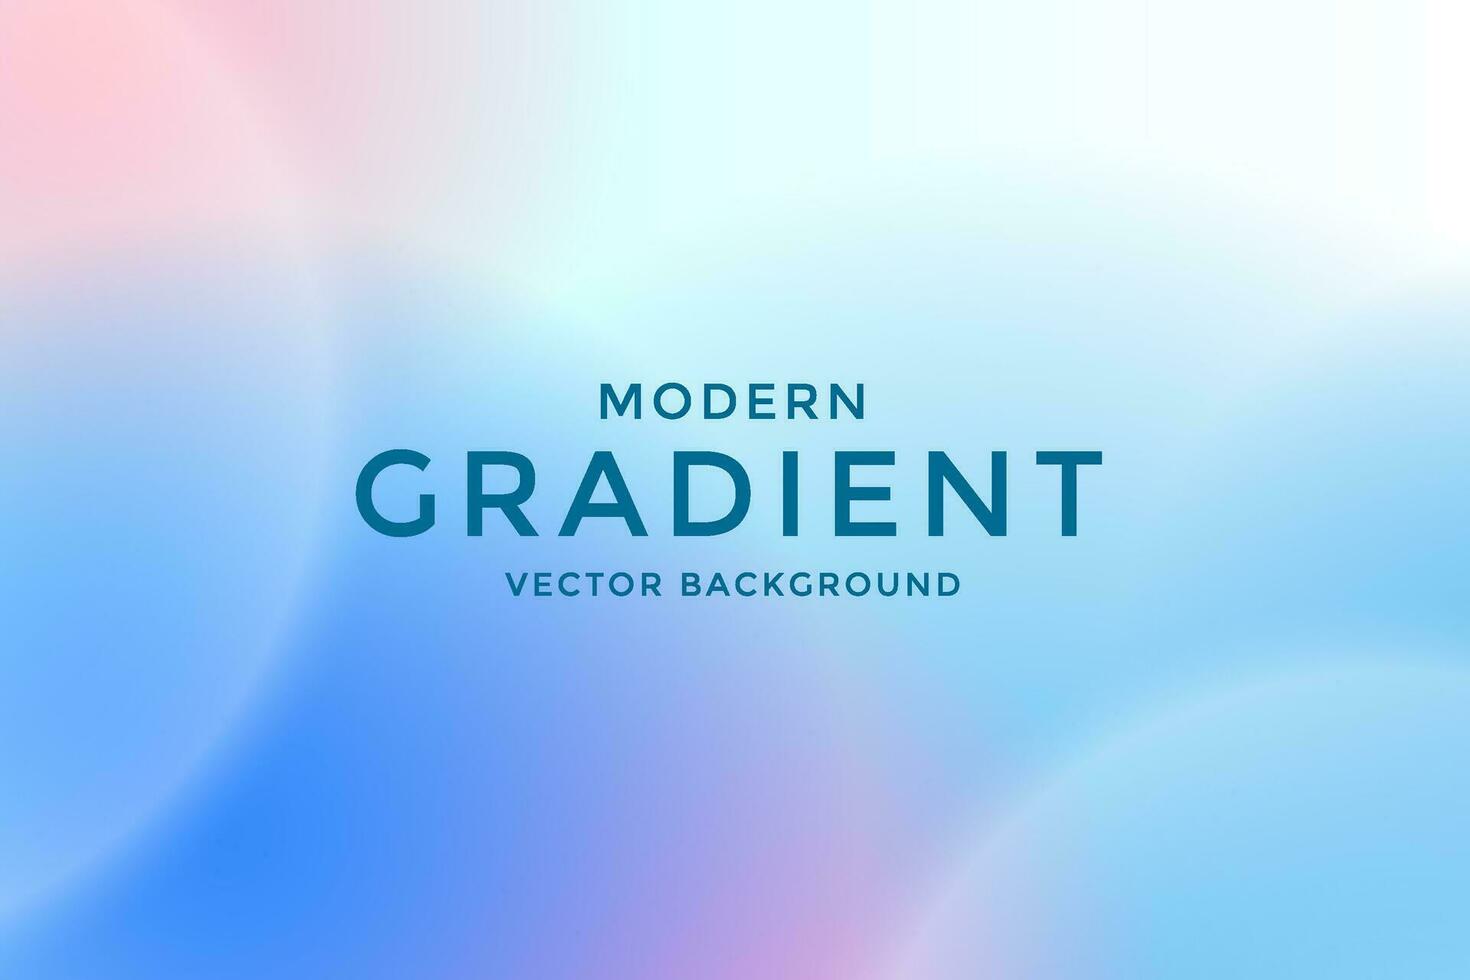 blurry blue and pink modern gradient background vector